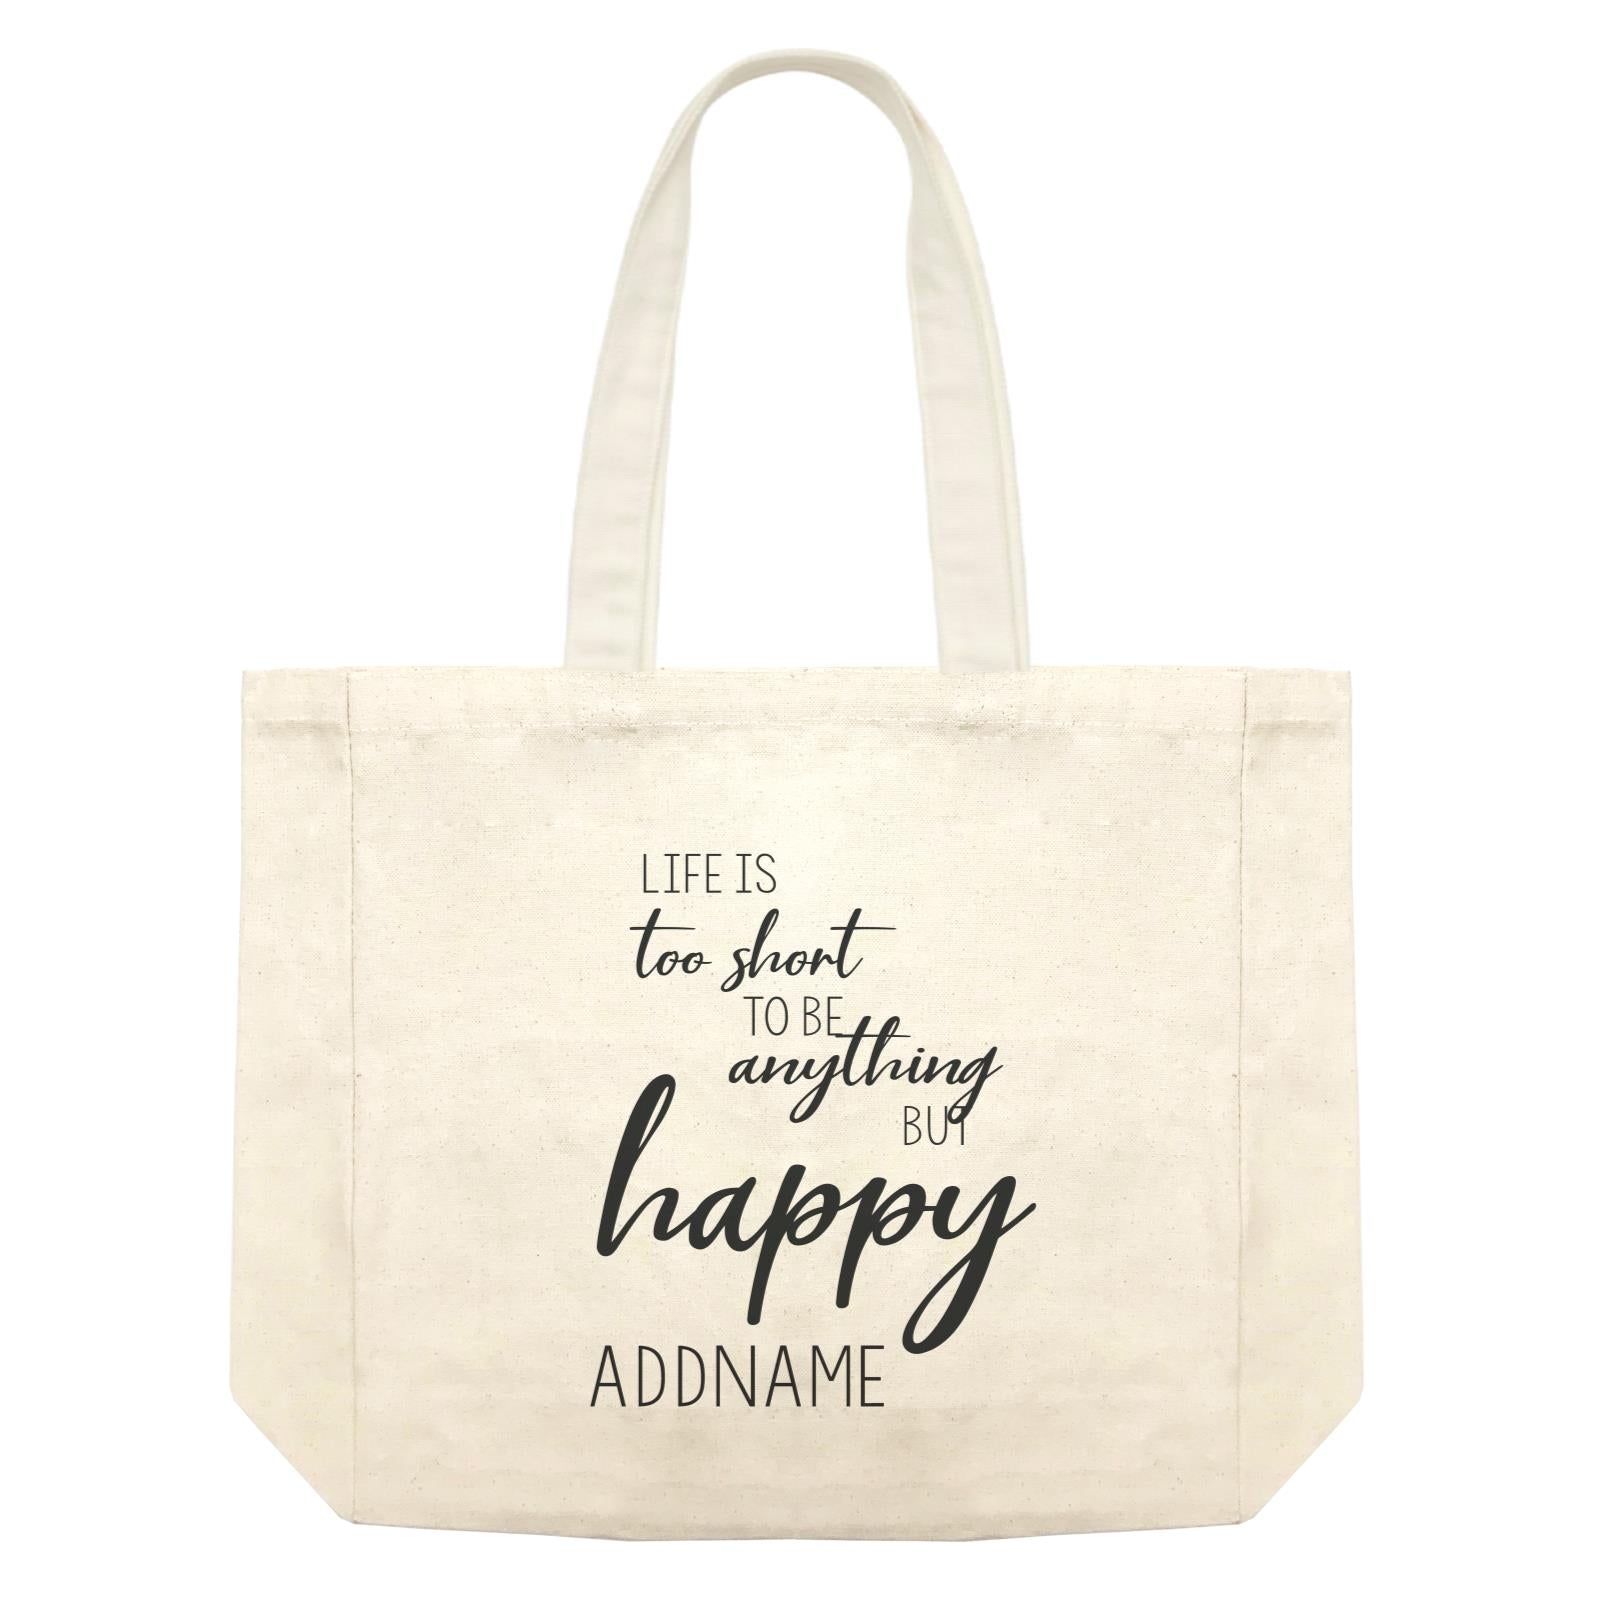 Inspiration Quotes Life Is Too Short To Be Anything But Happy Addname Shopping Bag